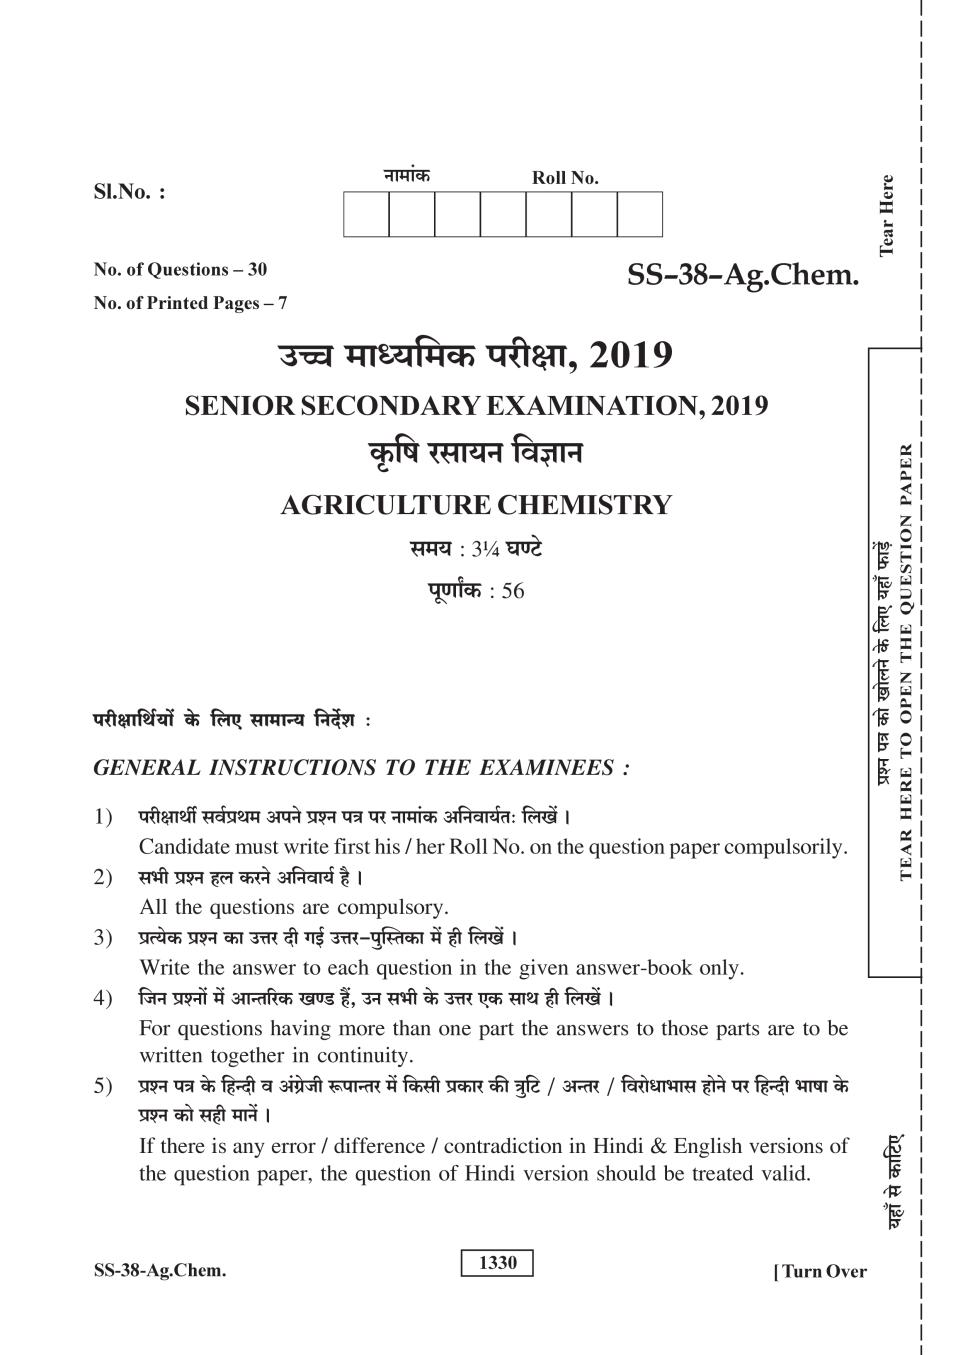 Rajasthan Board 12th Class Agriculture Chemistry Question Paper 2019 - Page 1